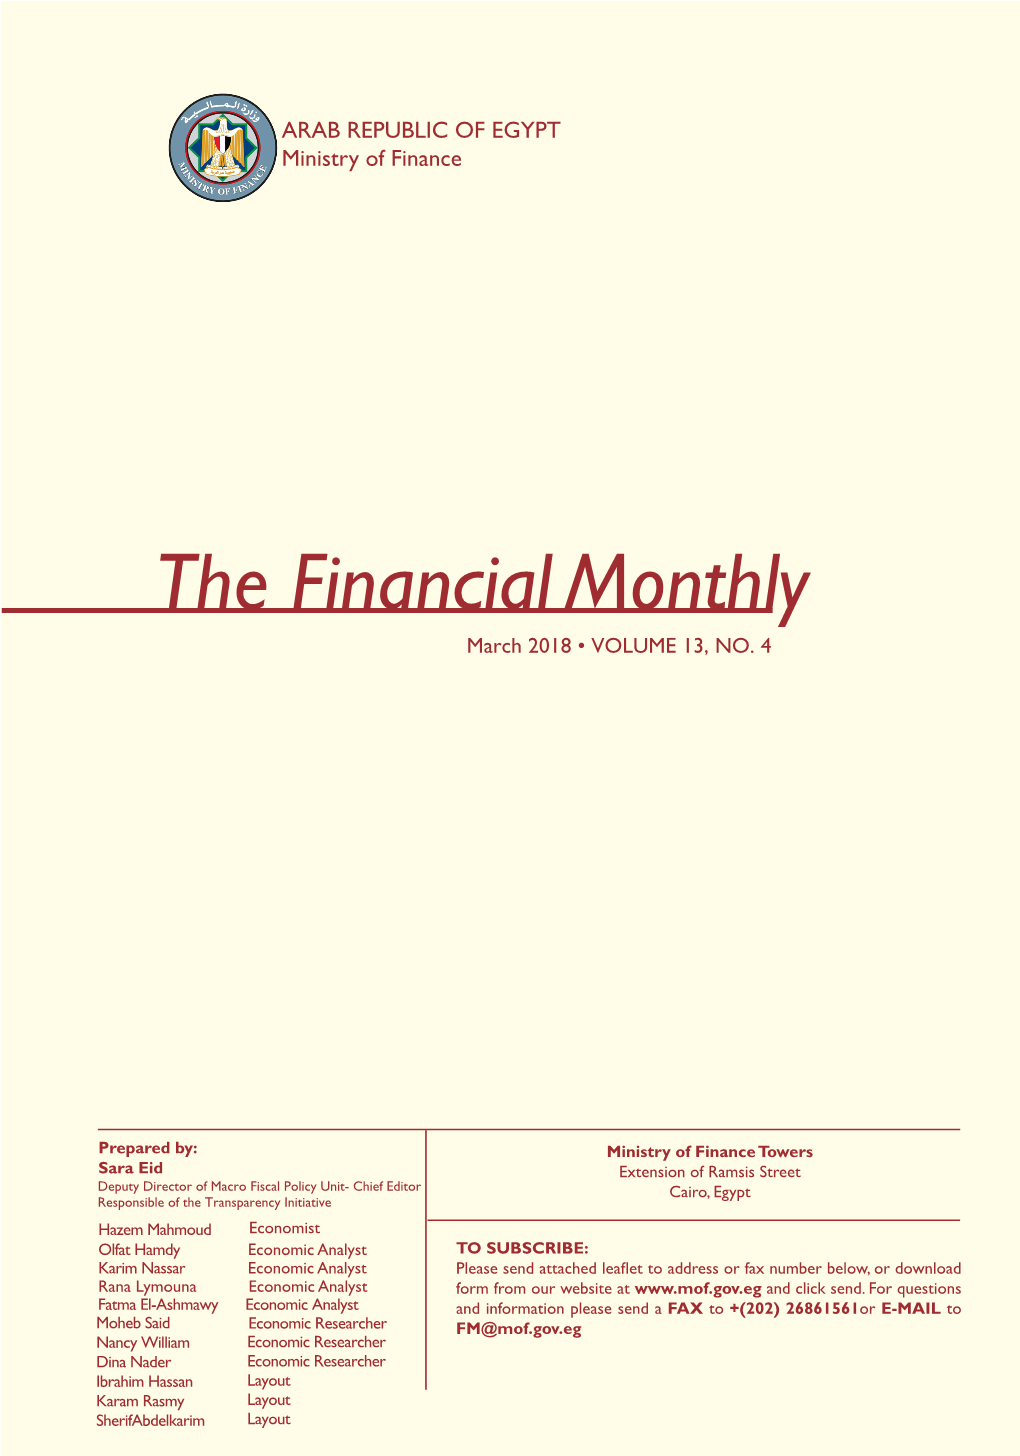 The Financialmonthly